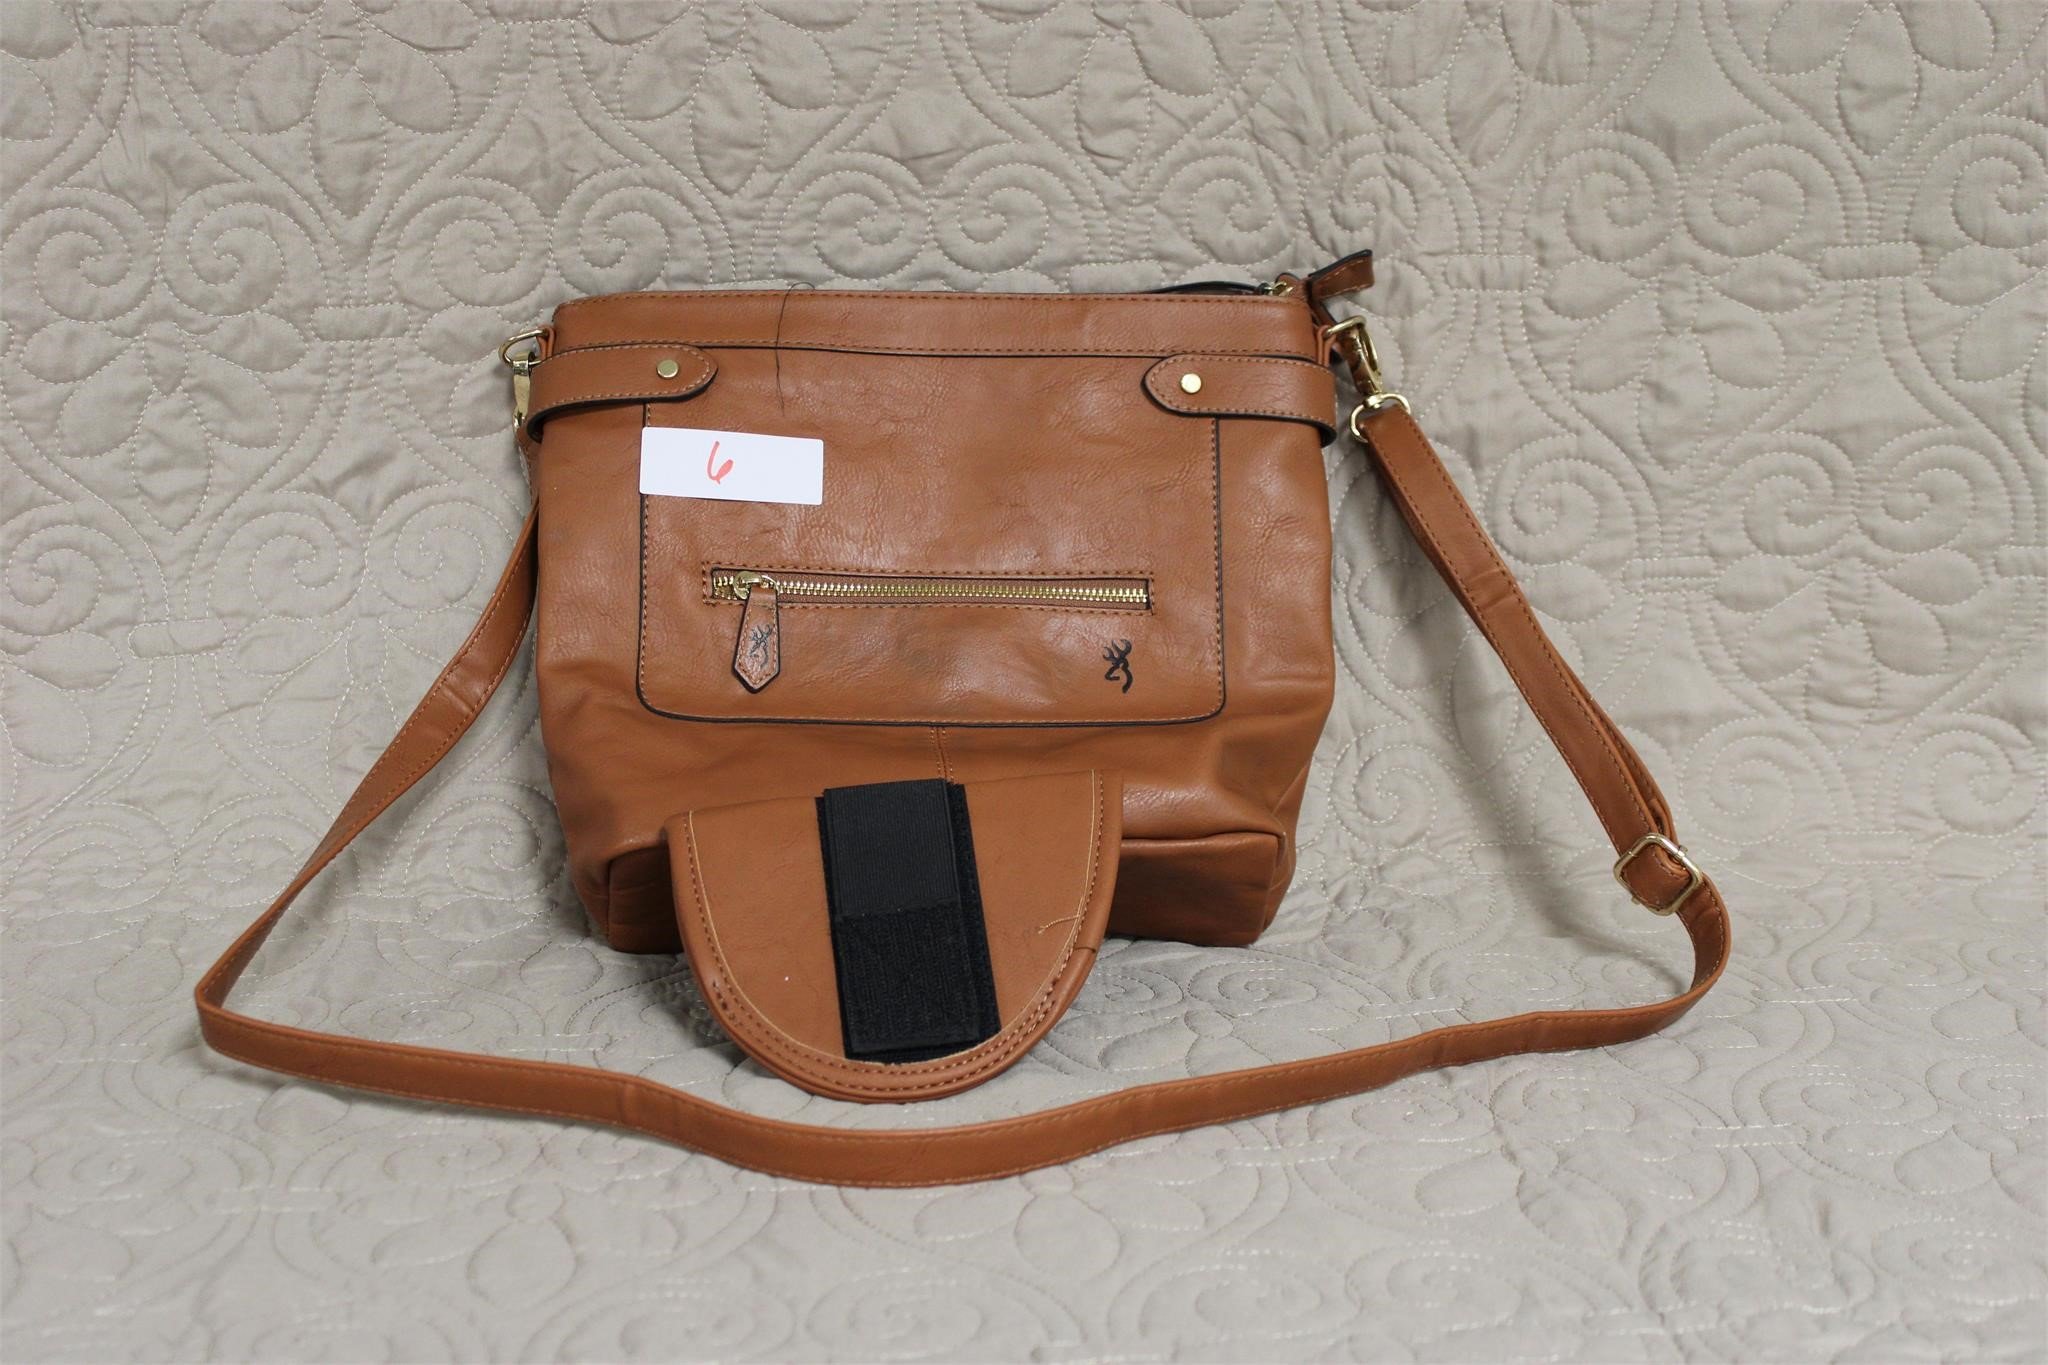 Browning Concealed Carry Purse with Holster